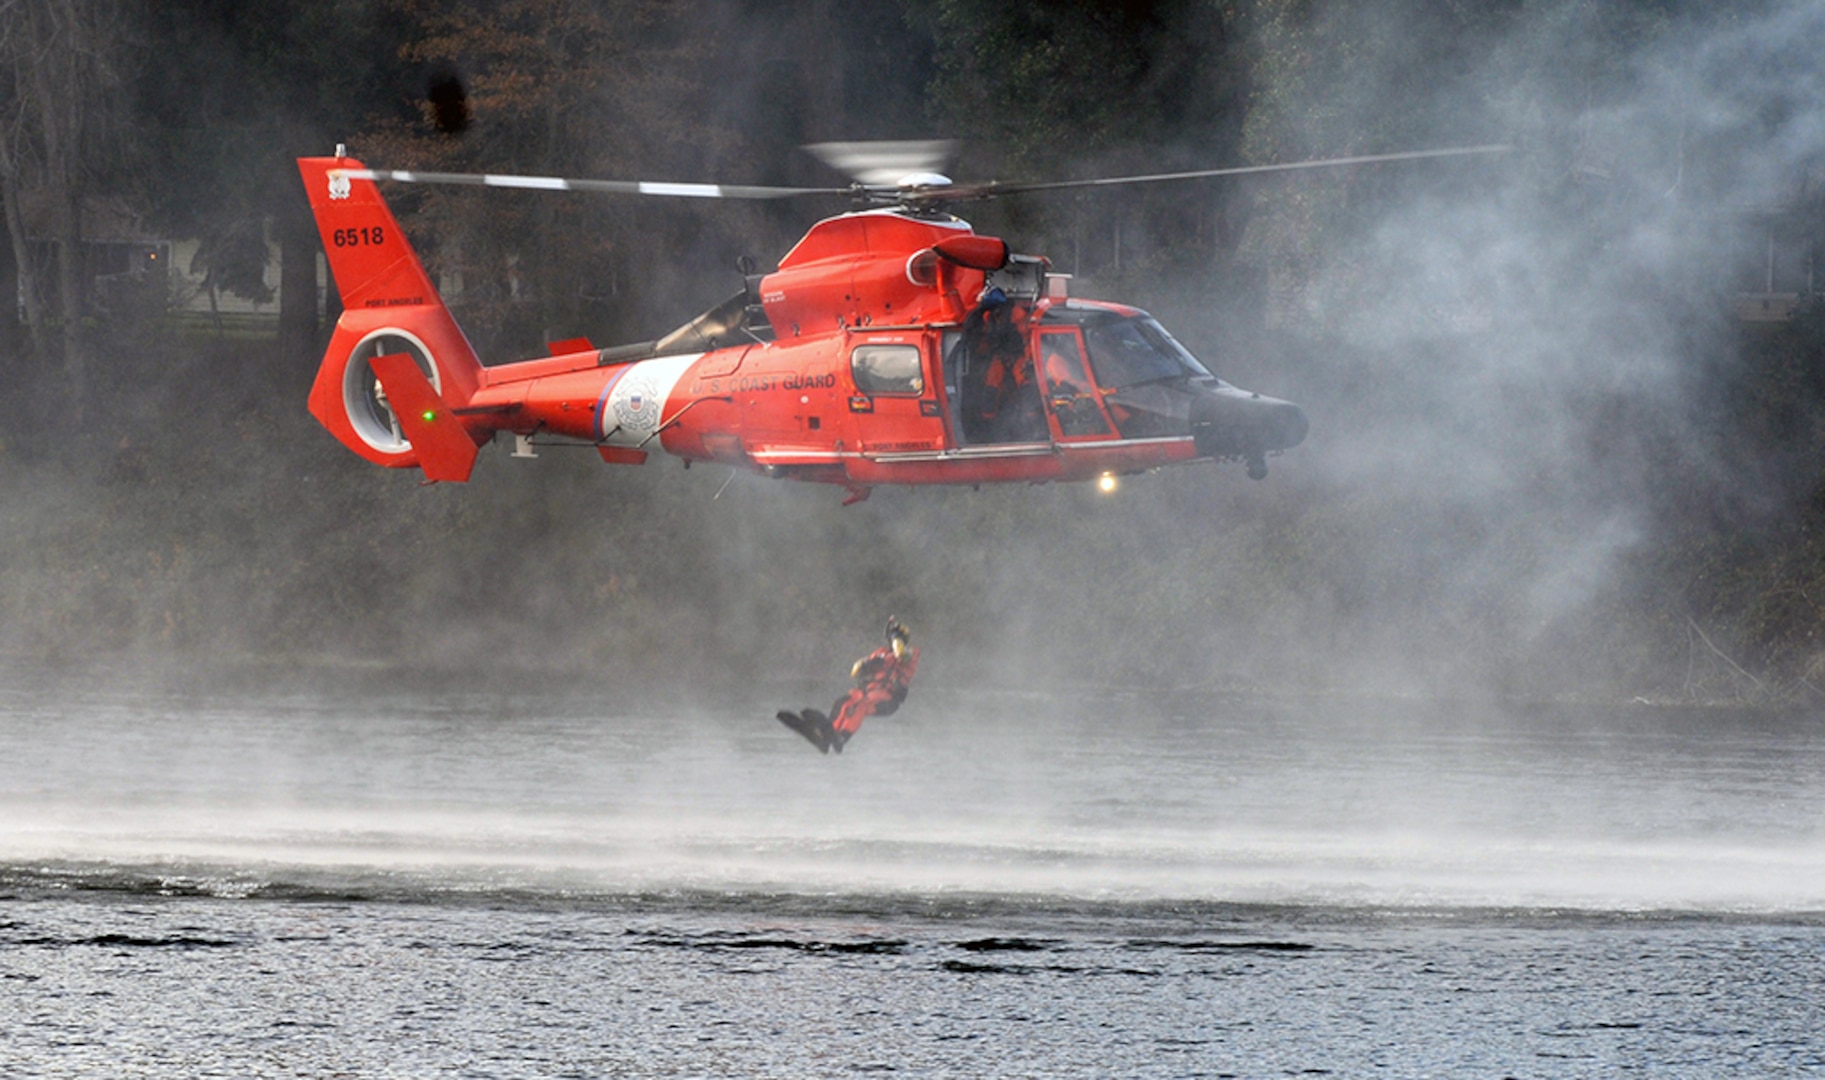 A U.S. Coast Guardsmen drops into waters during extraction training as part of the Disaster Management Exchange event on Joint Base Lewis-McChord, Wash., Nov. 20, 2015. The DME is a U.S. Pacific-hosted exchange focused on providing international humanitarian assistance and disaster relief to countries in the Indo-Pacific that could be affected by natural disasters